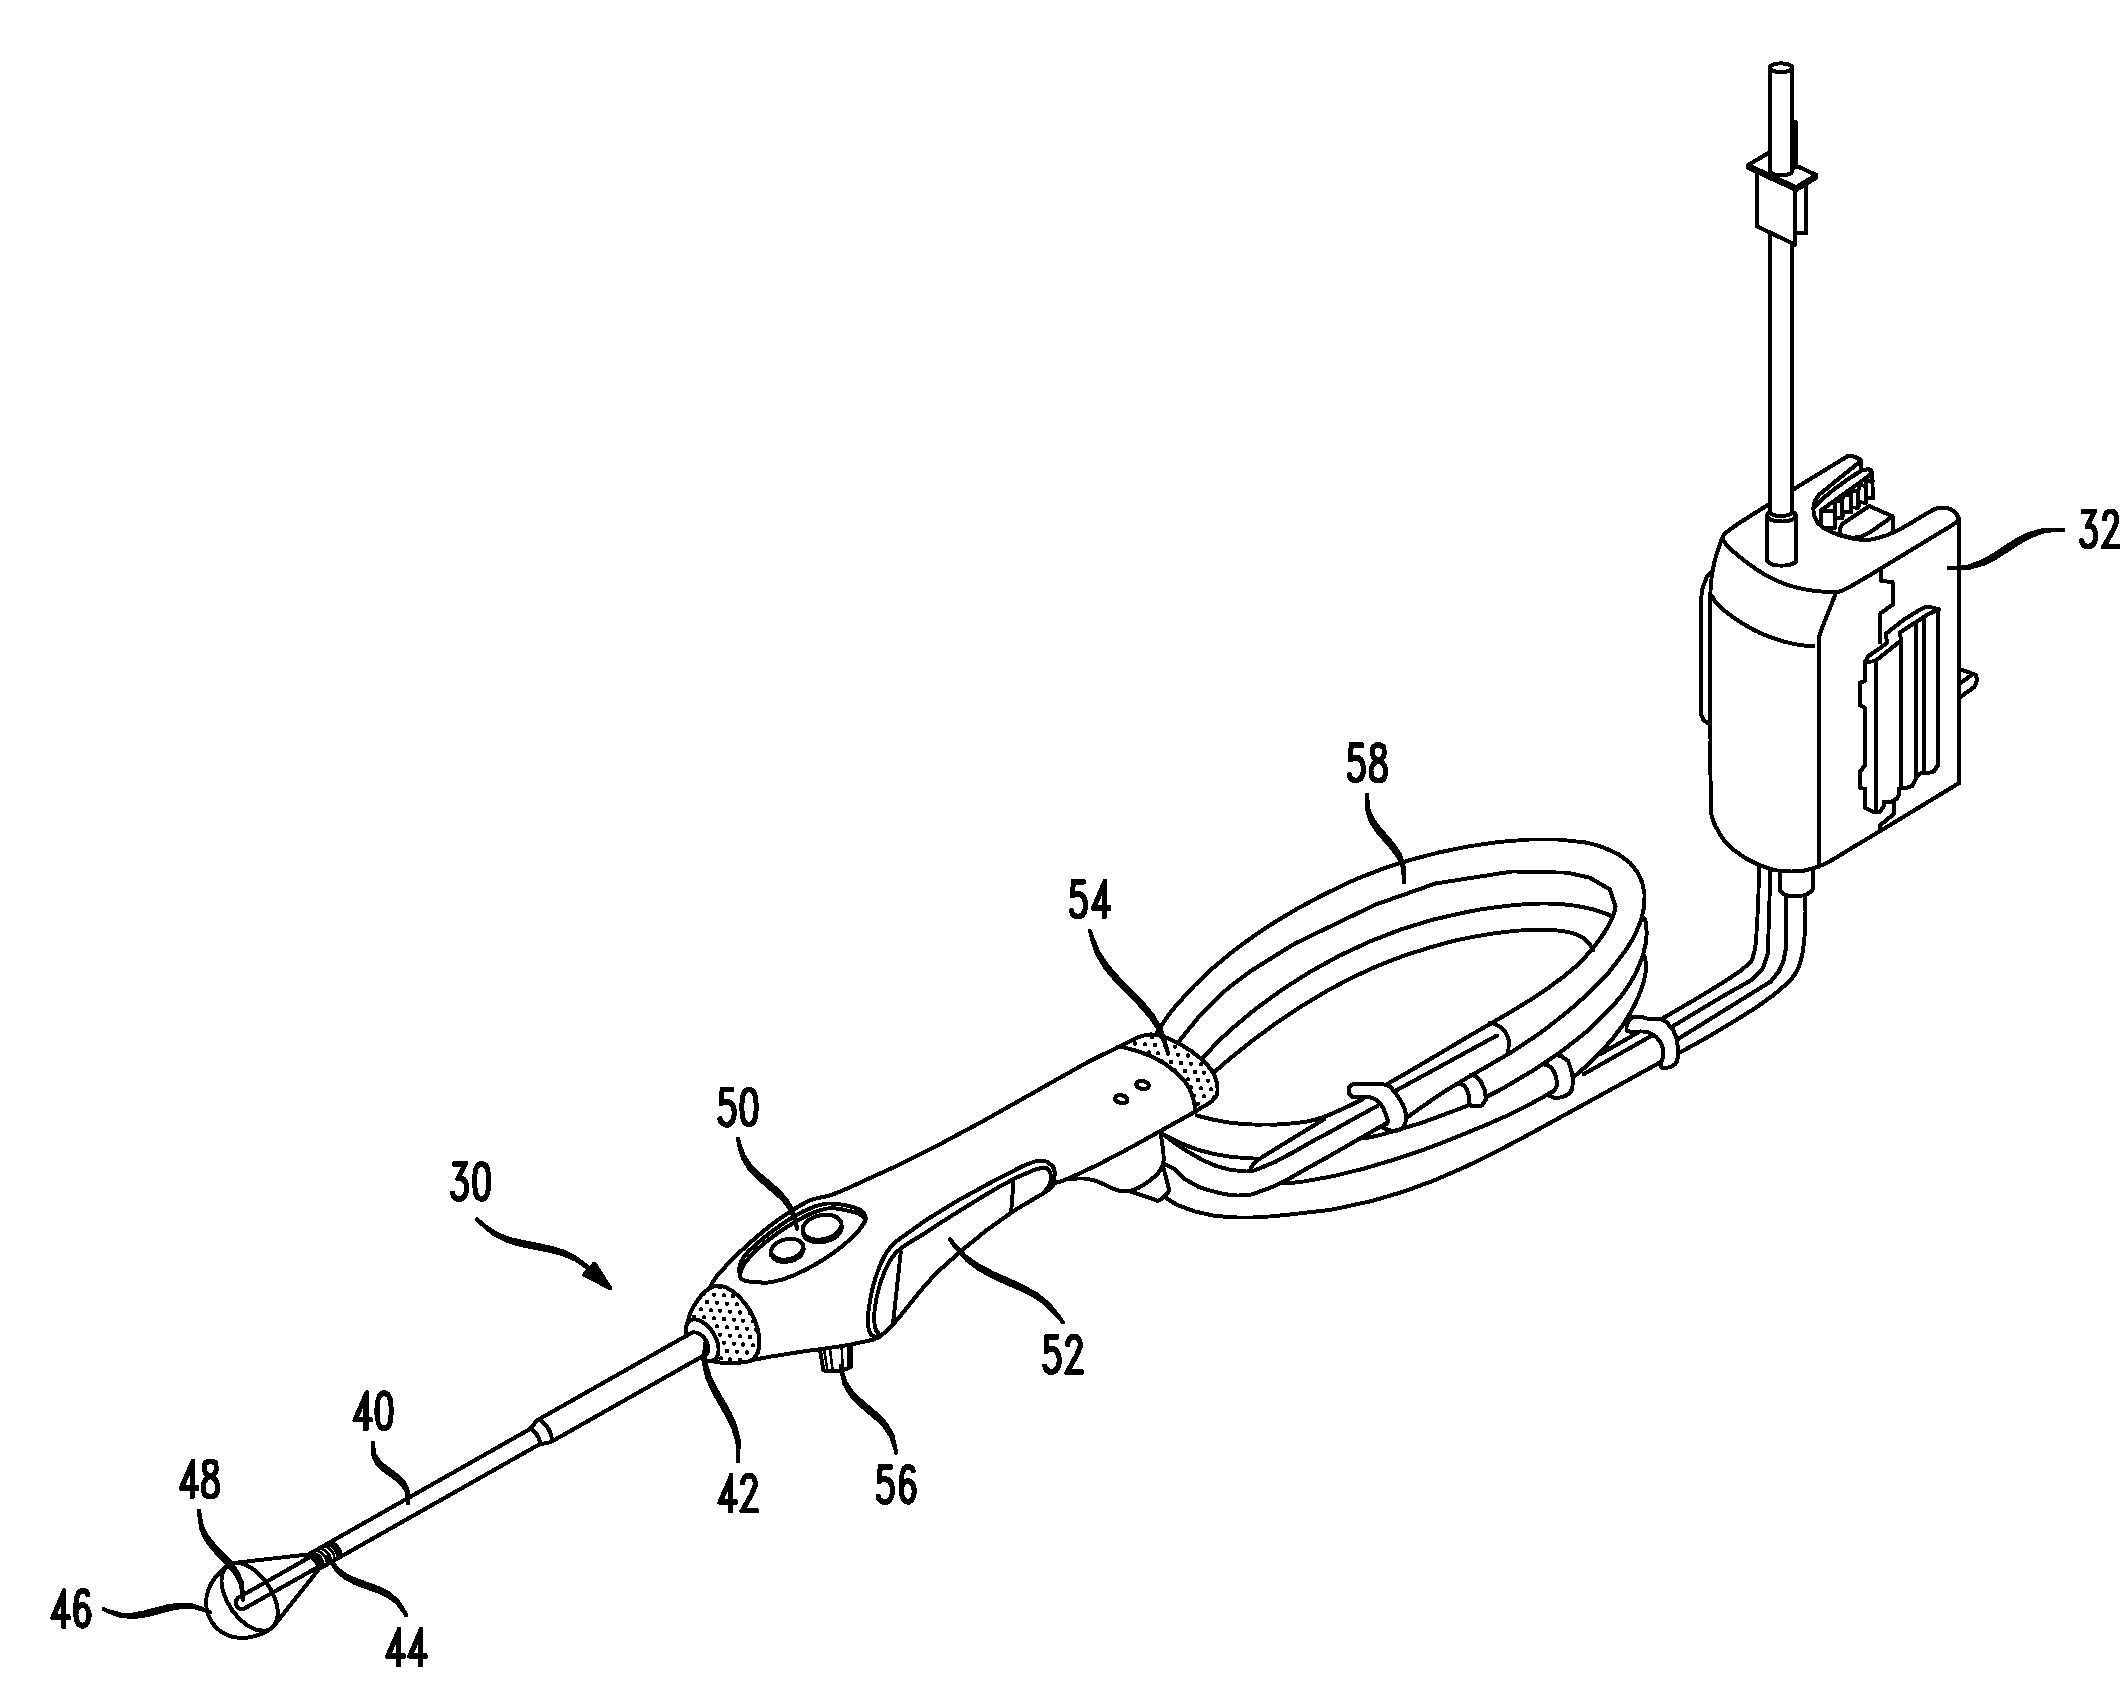 Balloon catheter systems and methods for treating uterine disorders